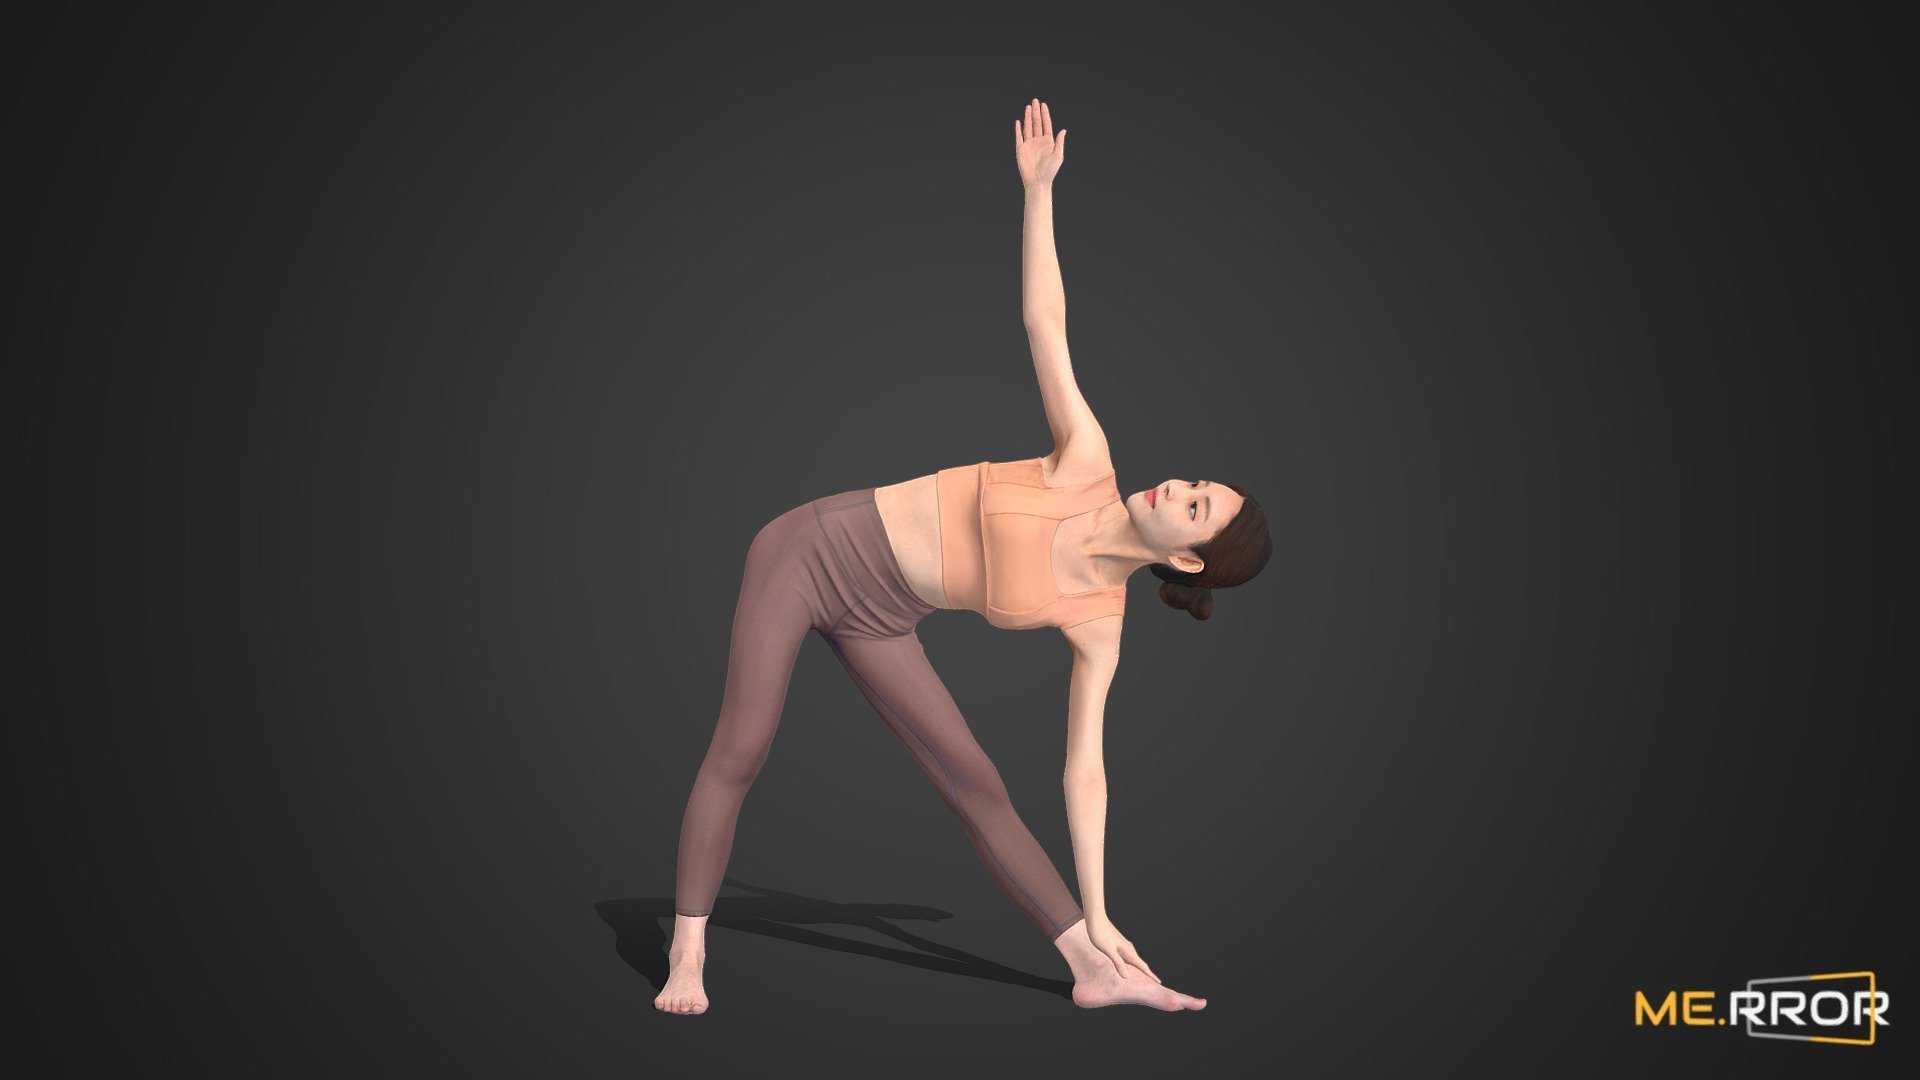 ME.RROR


From 3D models of Asian individuals to a fresh selection of free assets available each month - explore a richer diversity of photorealistic 3D assets at the ME.RROR asset store!

https://me-rror.com/store




[Model Info]




Model Formats : FBX, MAX

Texture Maps (8K) : Diffuse

You can buy this model at https://me-rror.com/asset/human/asset709




Find Scanned - 2M poly version here: https://sketchfab.com/3d-models/3ca53c034a1e47c0b63501b1ca3b4132

Find the topologized version here : https://sketchfab.com/3d-models/fb5548990d7b4df0b5893390108ce615

If you encounter any problems using this model, please feel free to contact us. We'd be glad to help you.



[About ME.RROR]

Step into the future with ME.RROR, South Korea's leading 3D specialist. Bespoke creations are not just possible; they are our specialty.

Service areas:




3D scanning

3D modeling

Virtual human creation

Inquiries: https://merror.channel.io/lounge - Asian WoMan Scan_Posed 16 100k poly - 3D model by ME.RROR Studio (@merror) 3d model